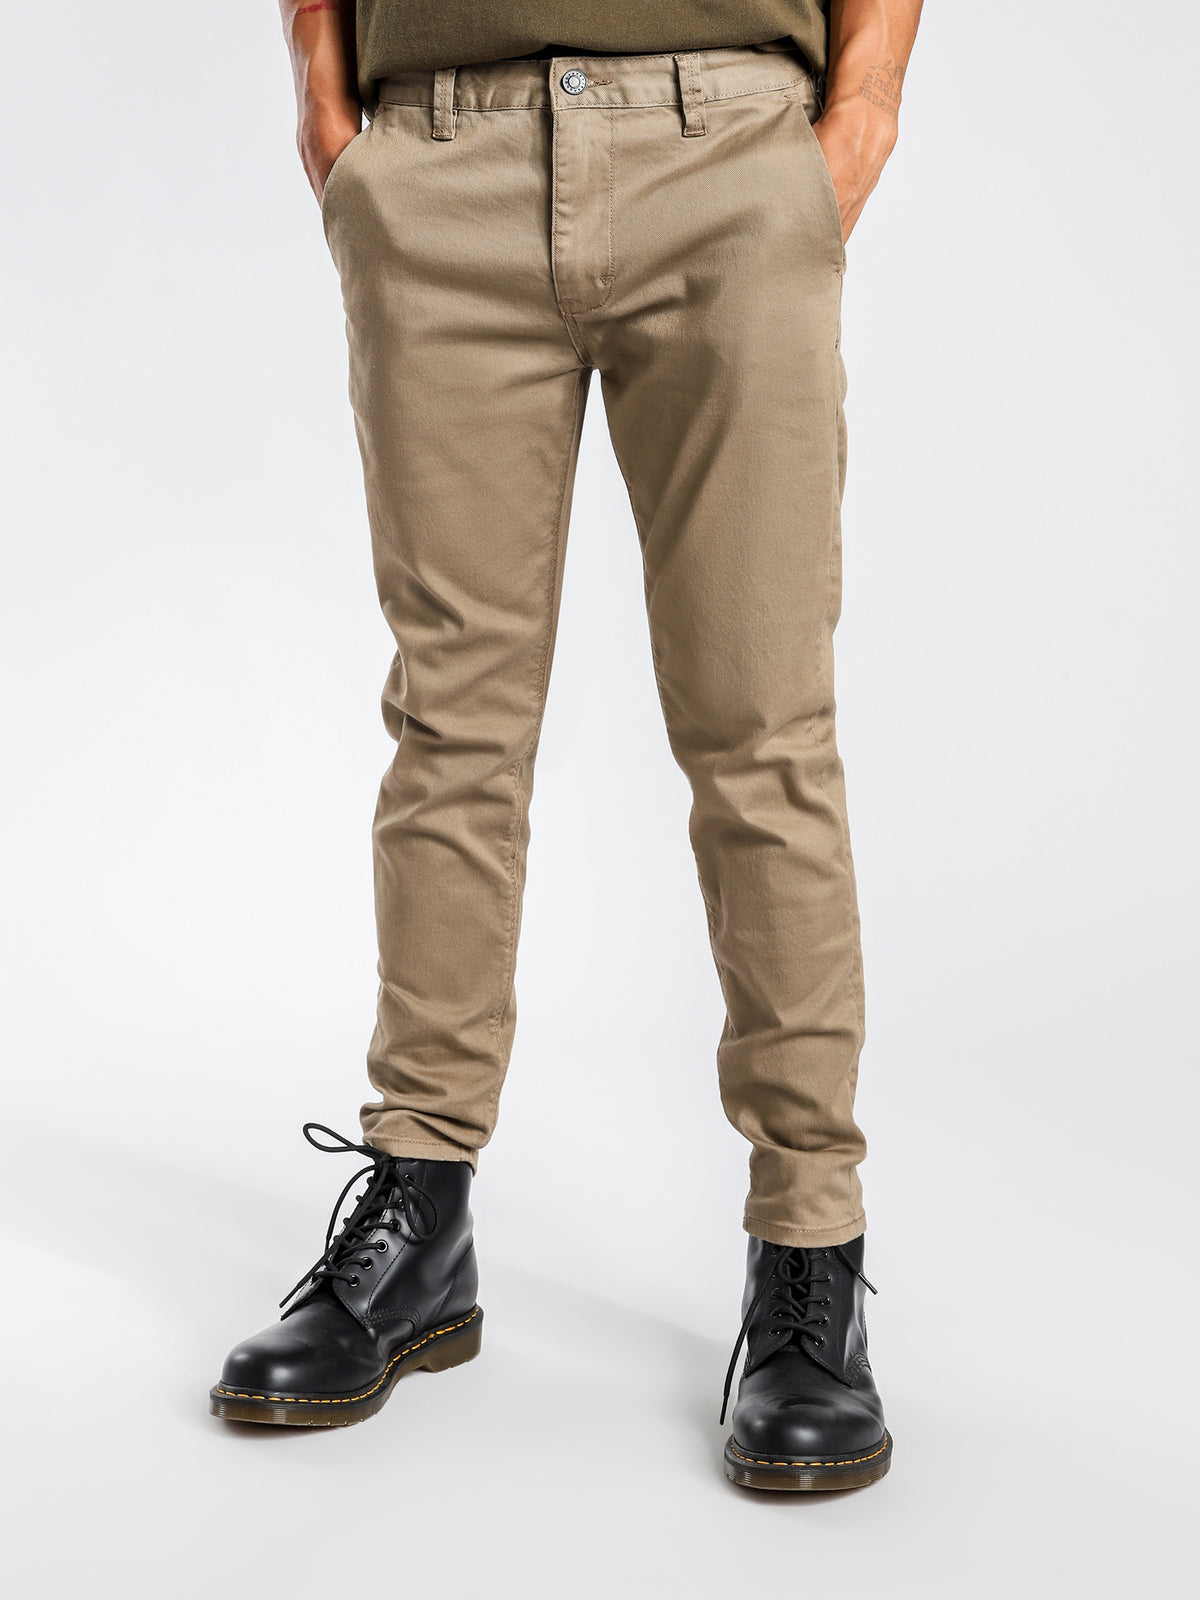 A Dropped Slim Chino Pants in Sand